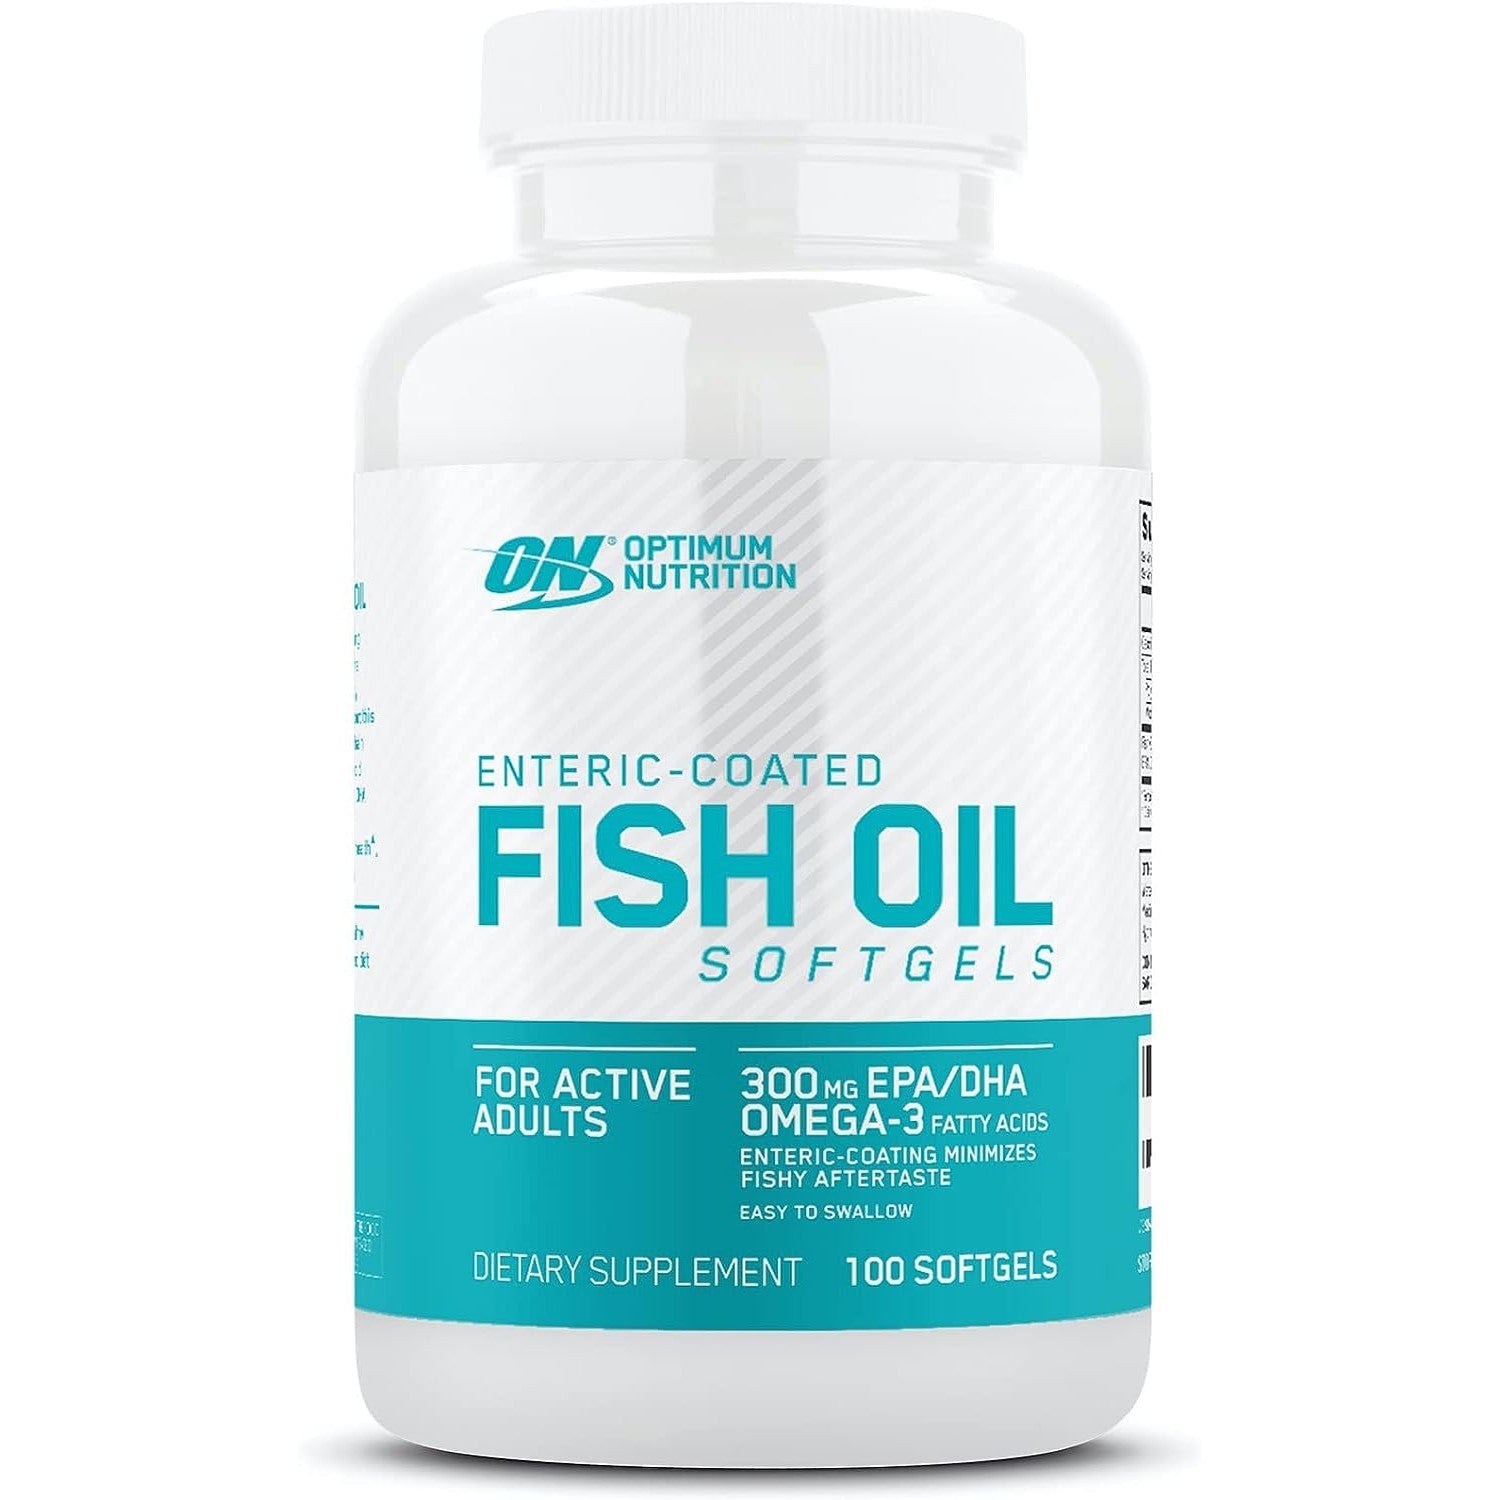 Optimum Nutrition Omega 3 Fish Oil For Active Adults, 300MG 100 Softgels